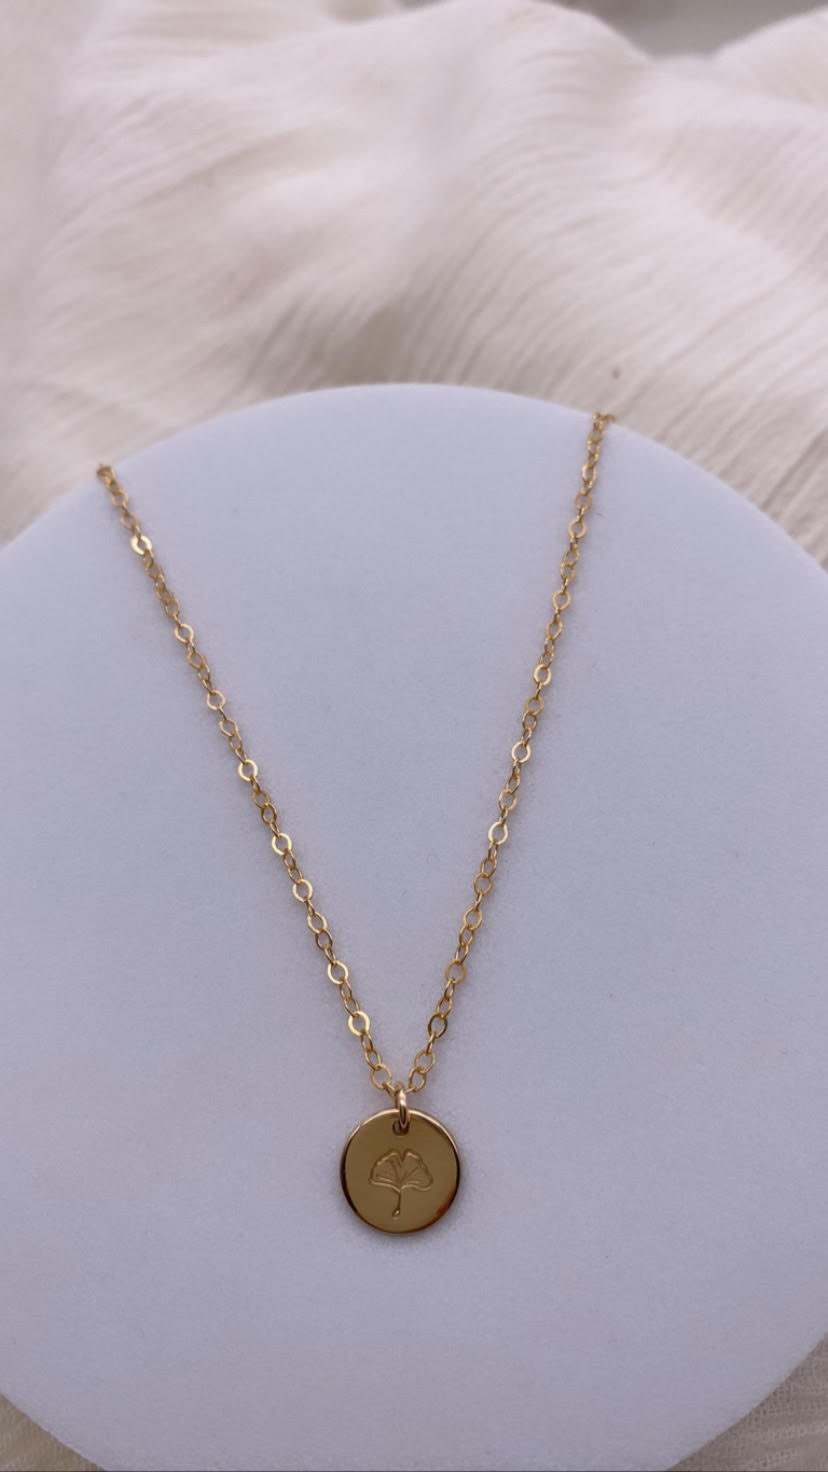 Ginkgo Leaf Charm Necklace - Meaningful Gifts - Gold Filled